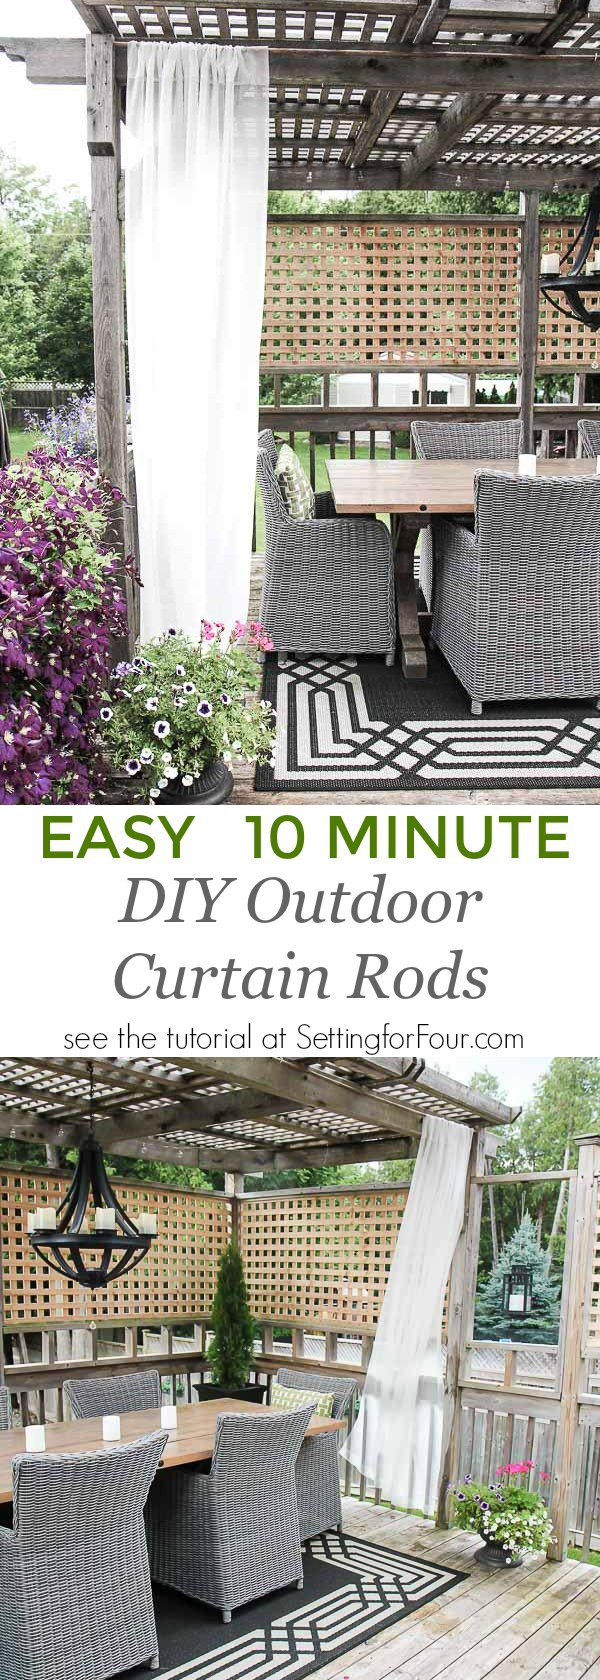 DIY Outdoor Curtain Rods
 Easy DIY Outdoor Curtain Rods In 10 Minutes Setting for Four